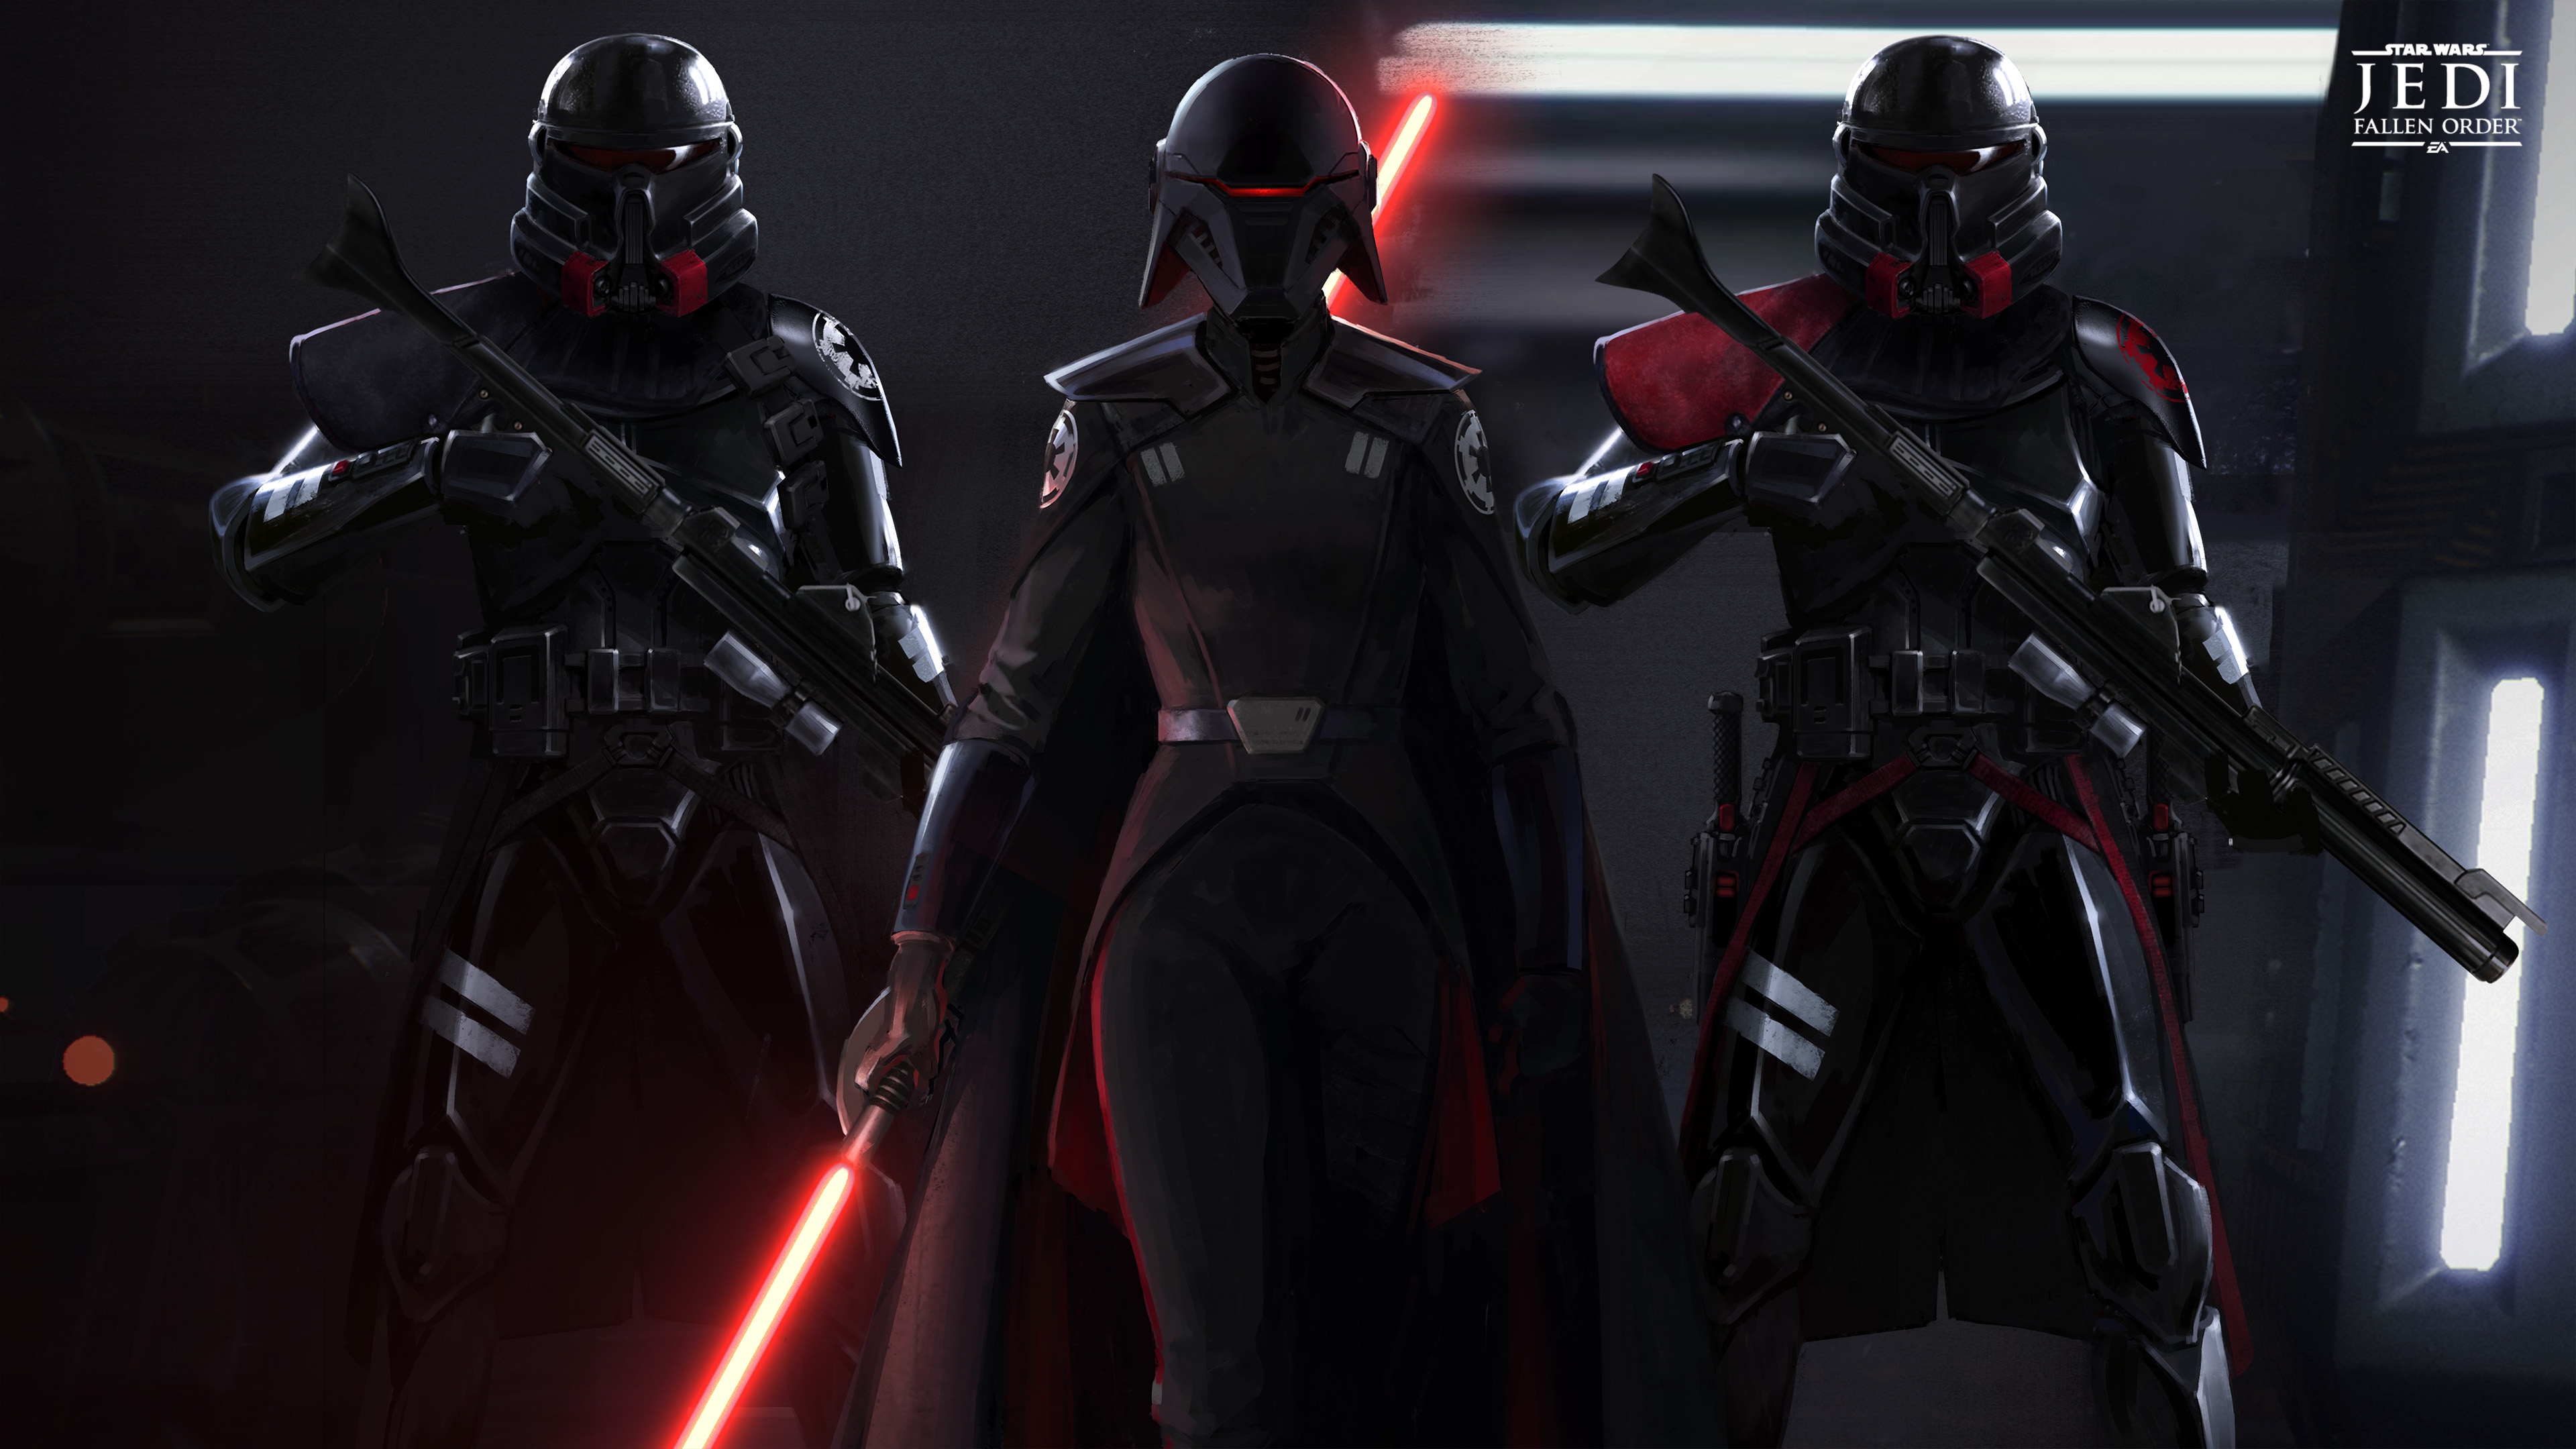 Jedi Fallen Order Star Wars Video Games Lightsaber Video Game Art Sith Storm Troopers Second Sister 3840x2160